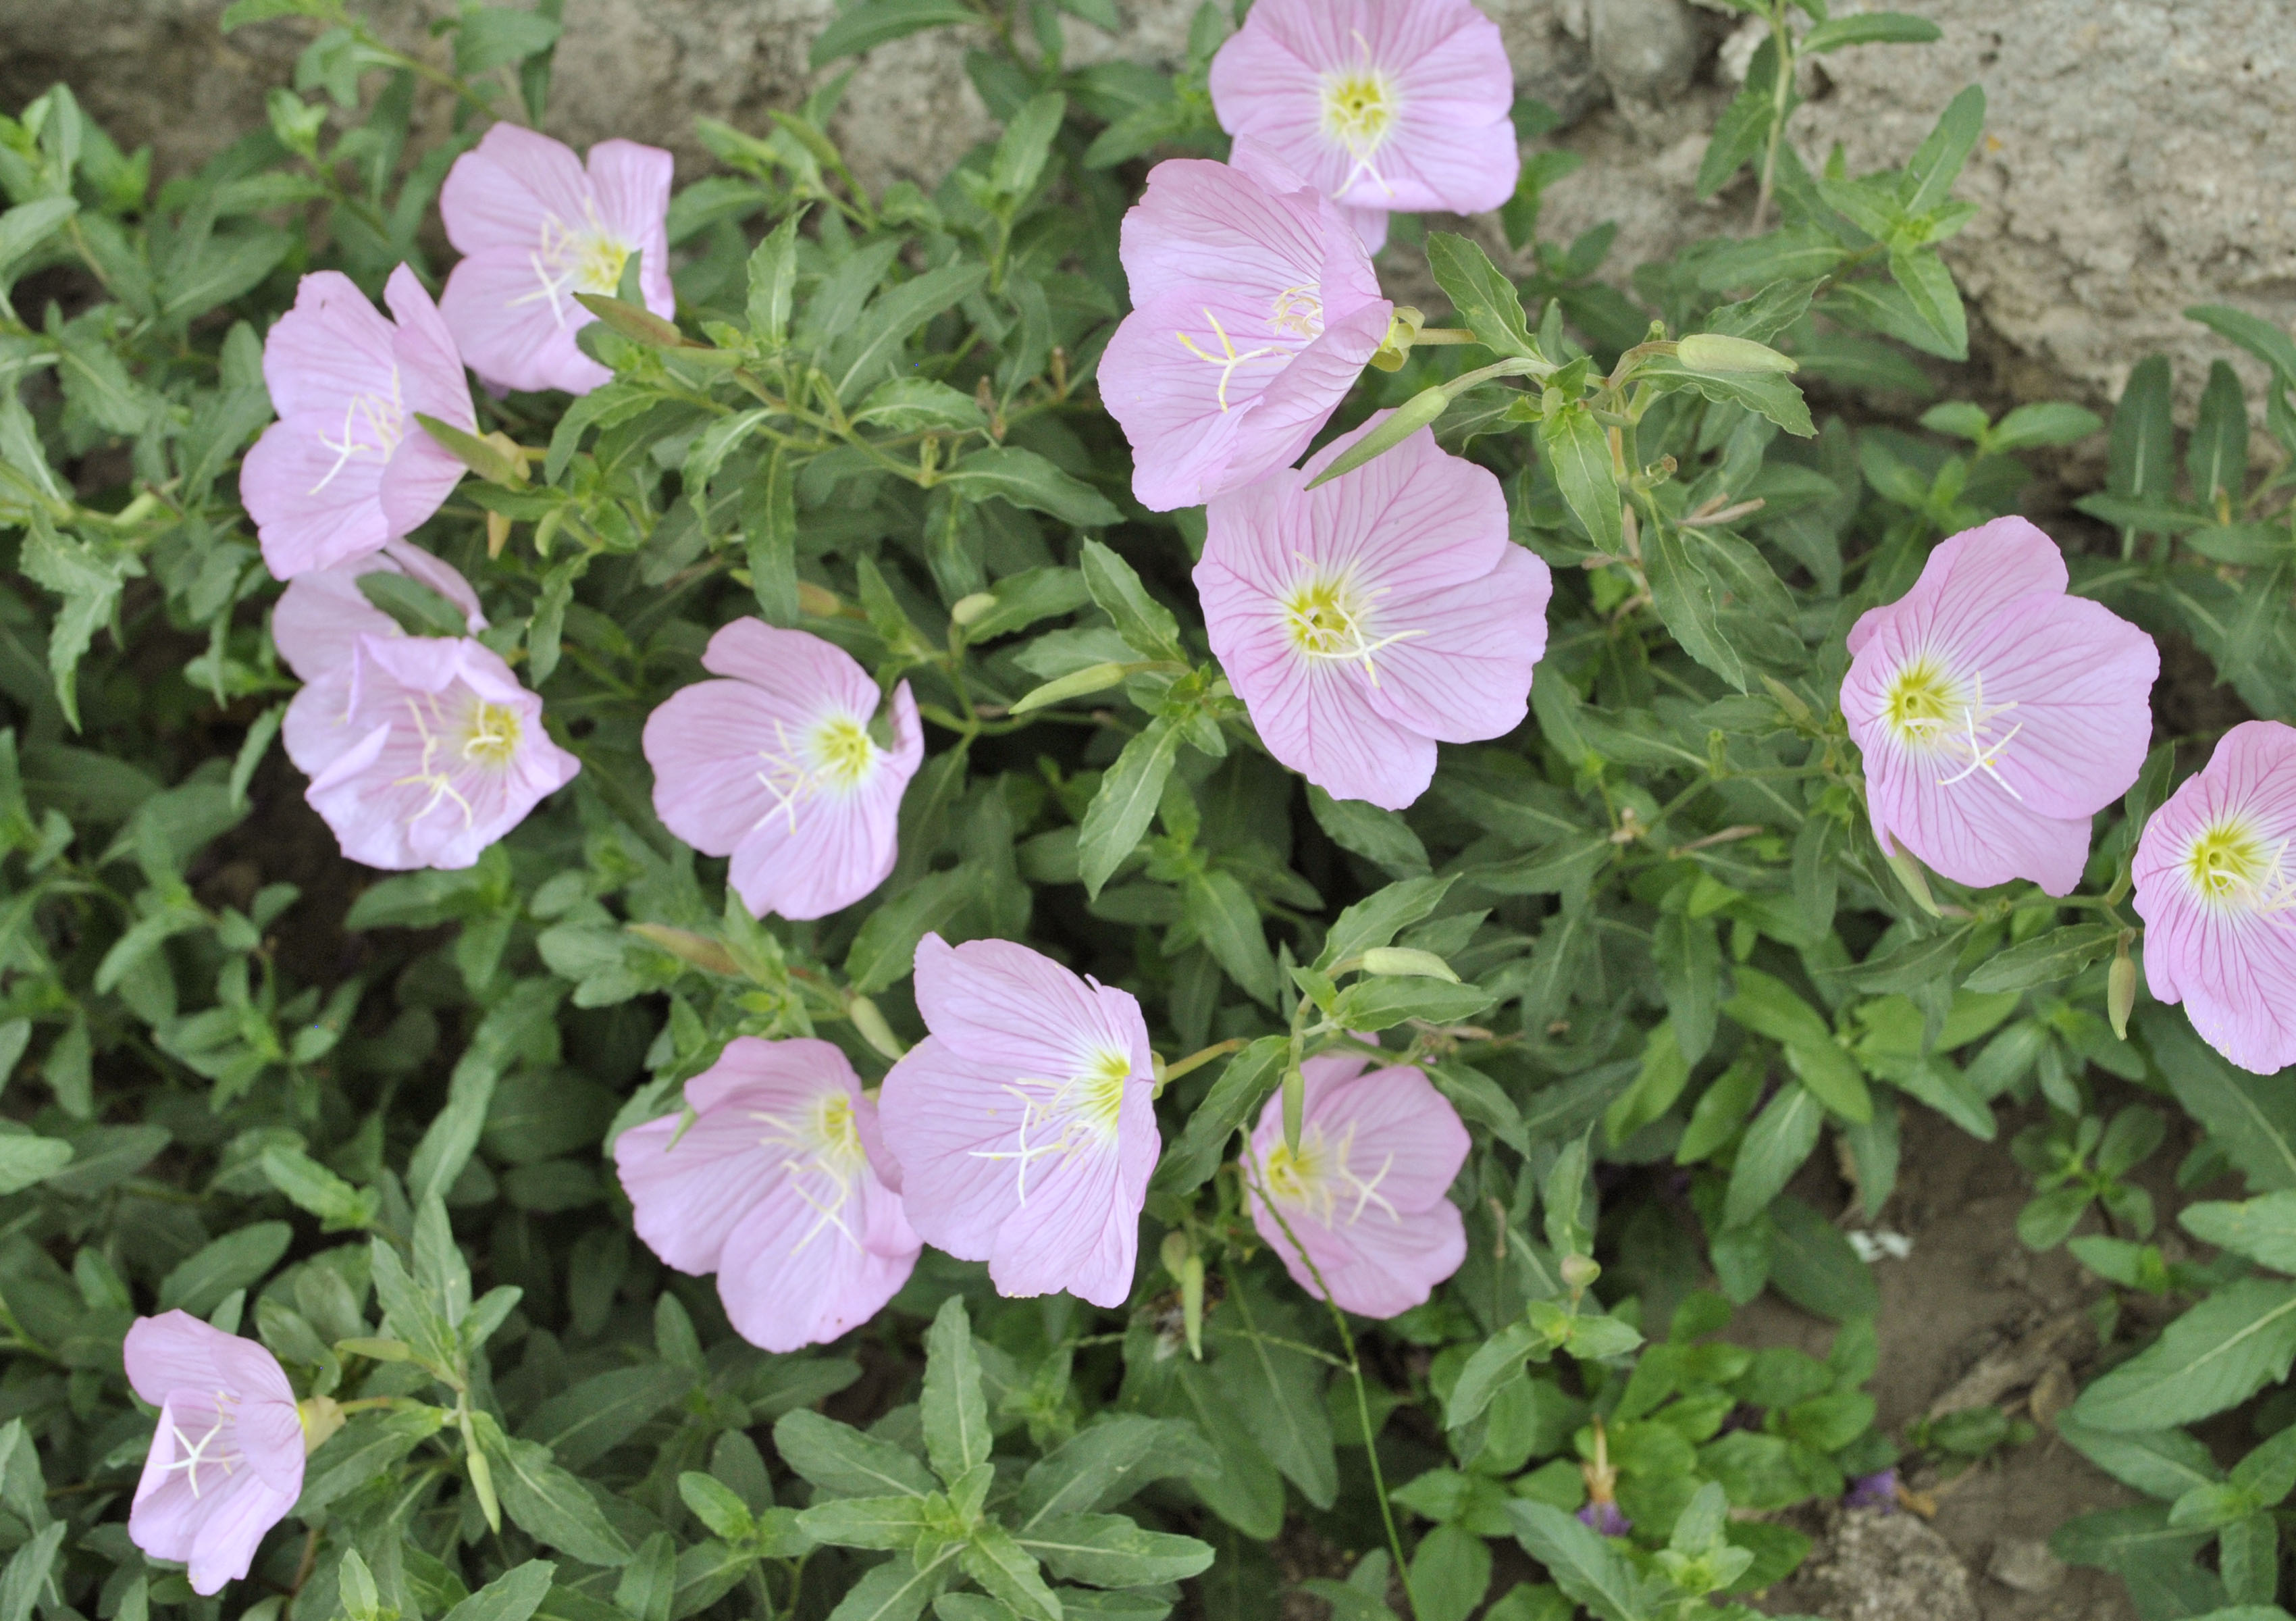 How to Grow Evening Primrose: 10 Steps (with Pictures) - wikiHow